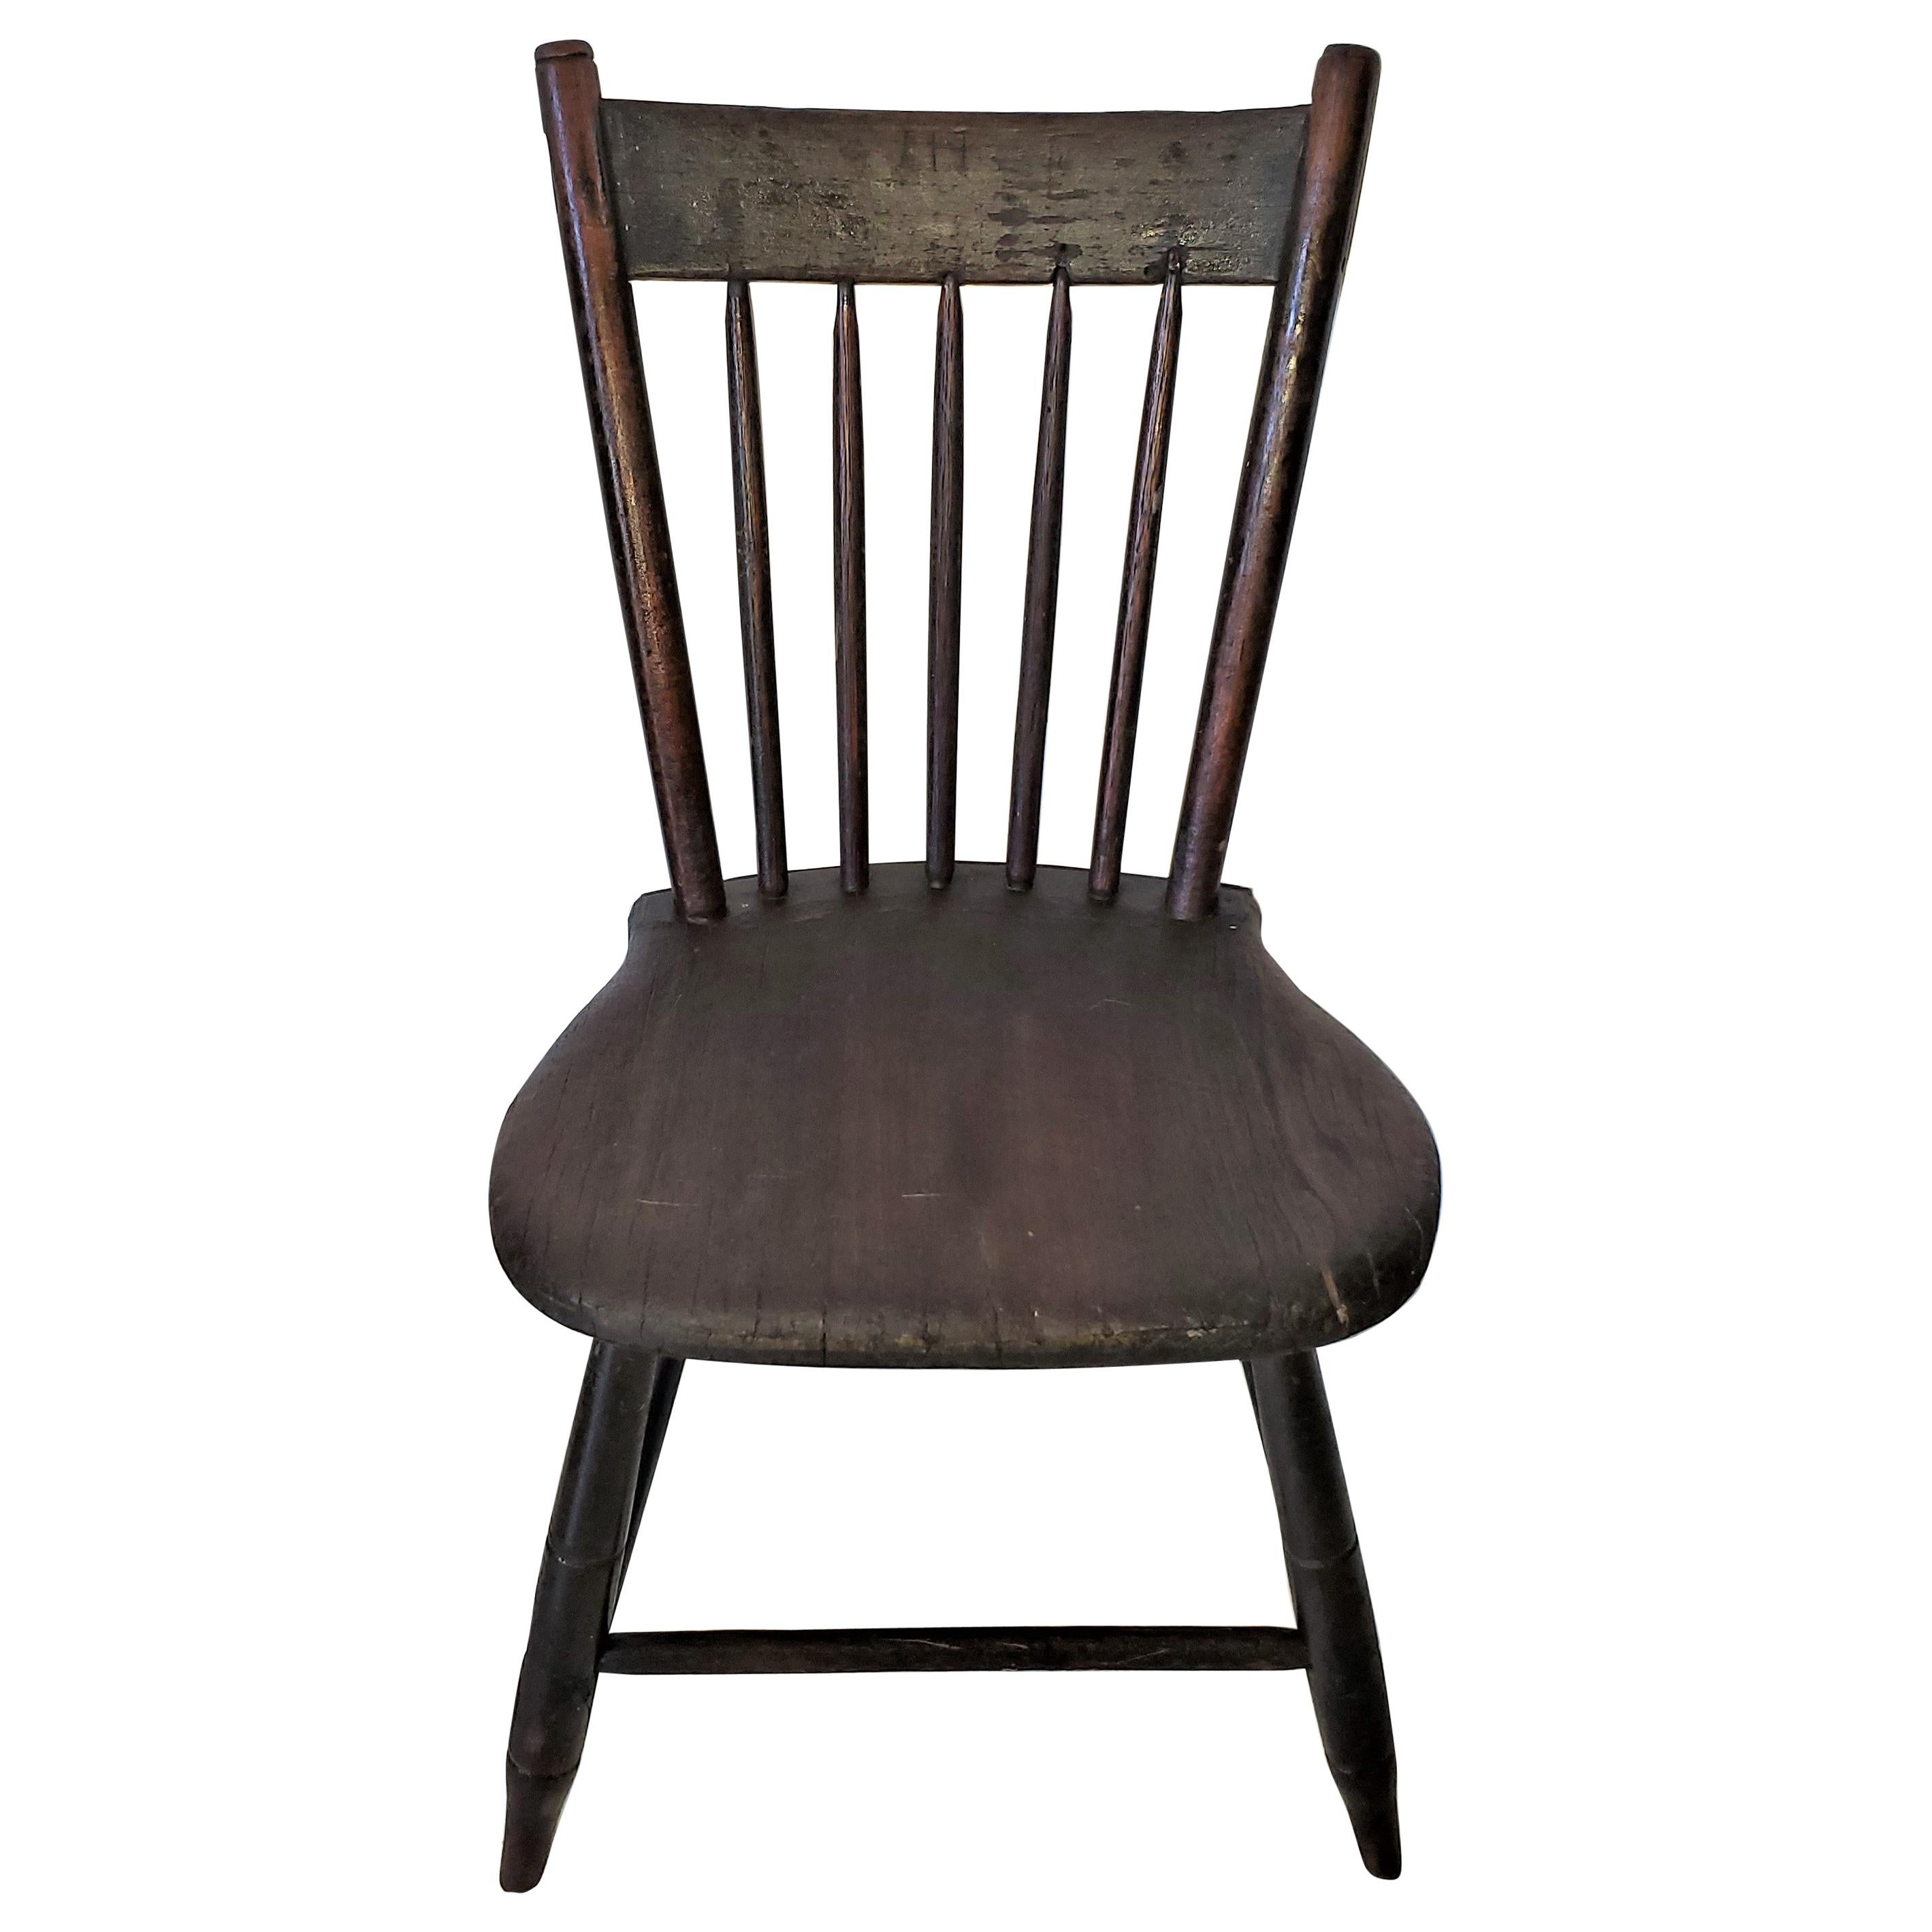 19th Century American Walnut Childs Chair with Provenance For Sale